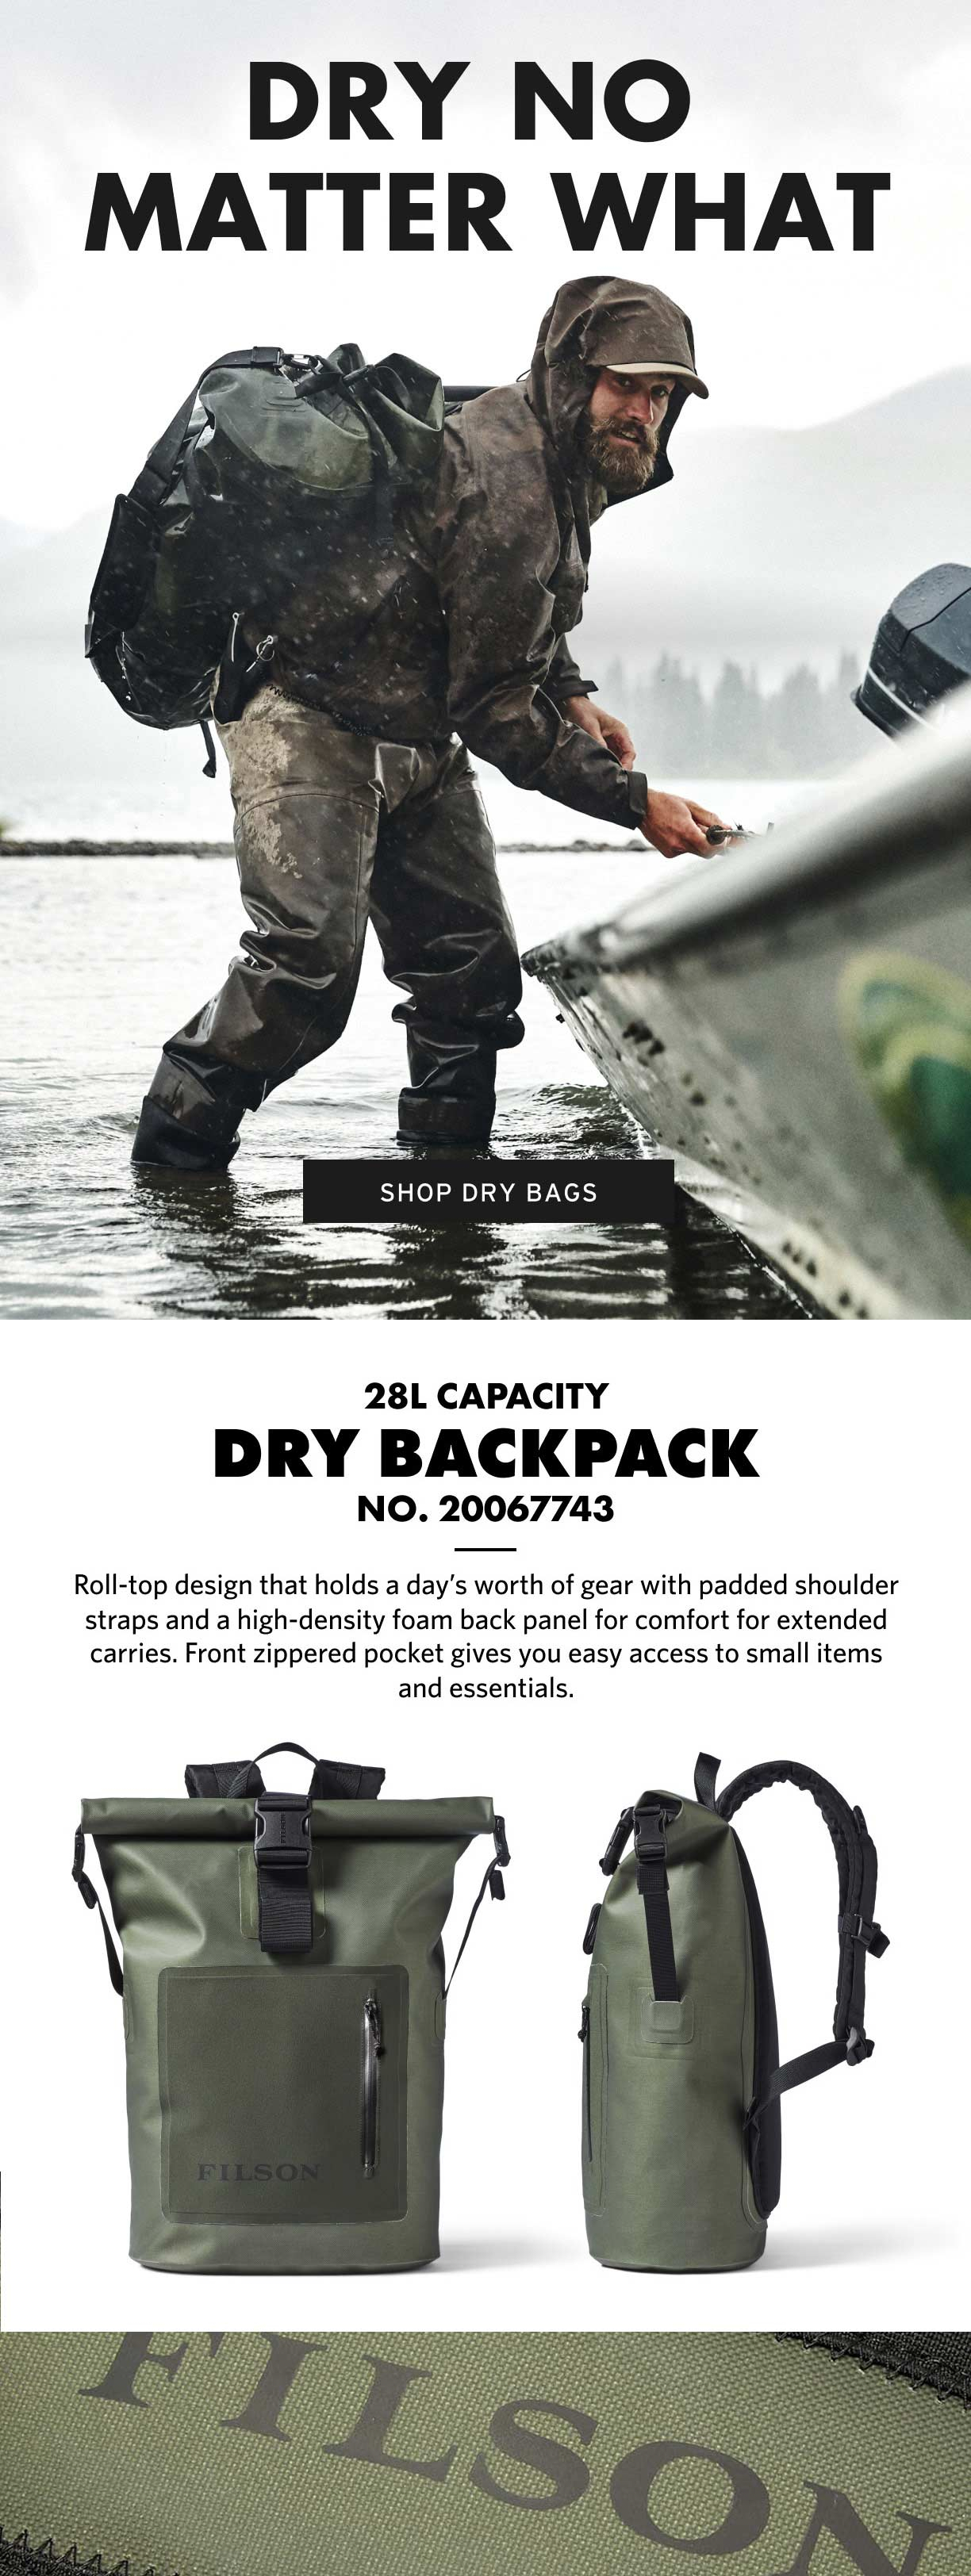 Filson Dry Backpack Productinformation